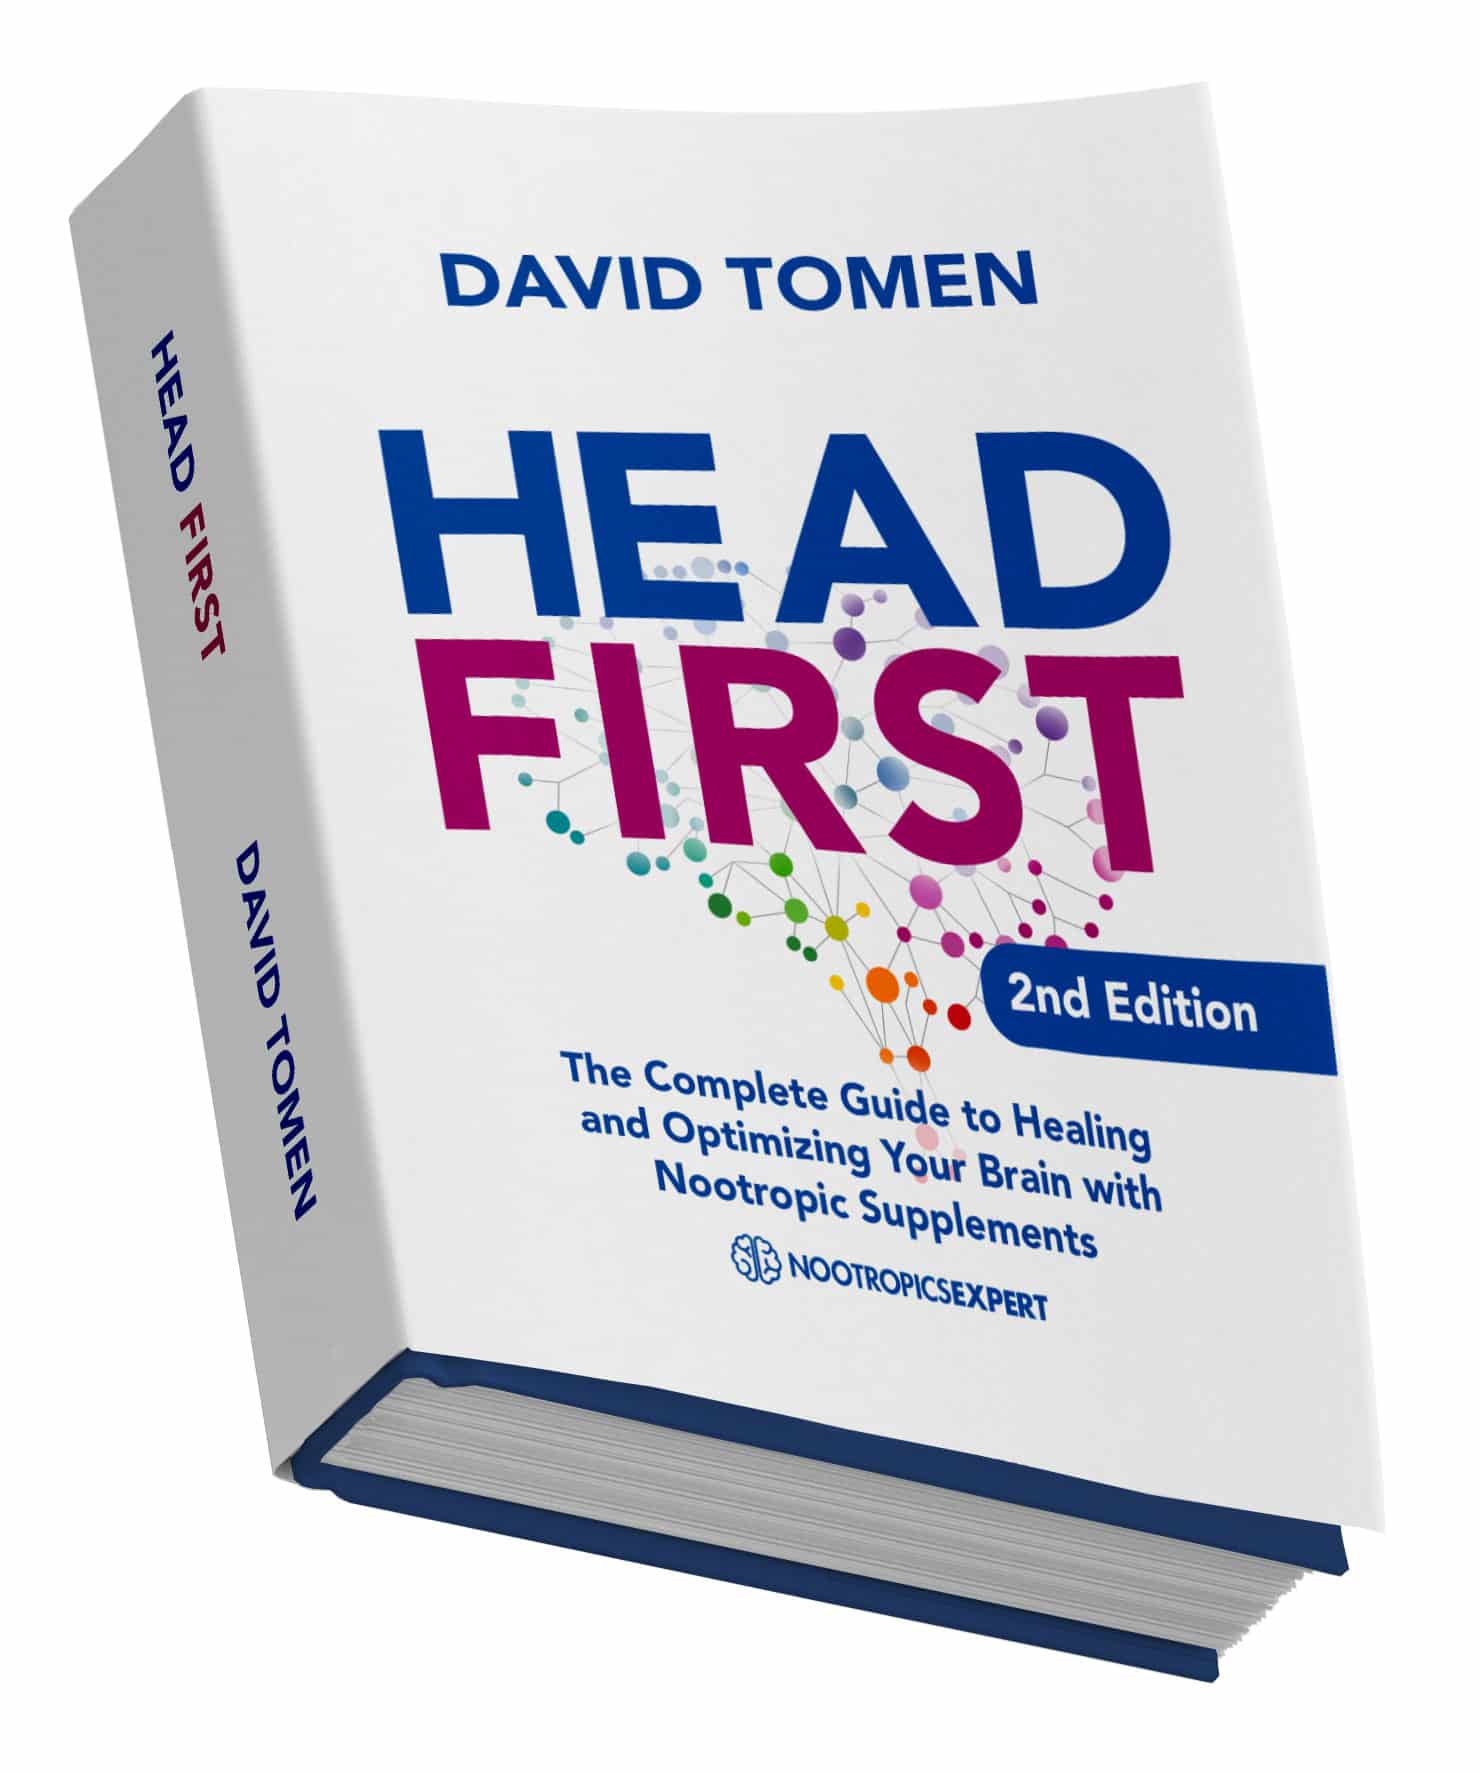 Head First 2nd Edition - The Complete Guide to Healing & Optimizing Your Brain with Nootropic Supplements